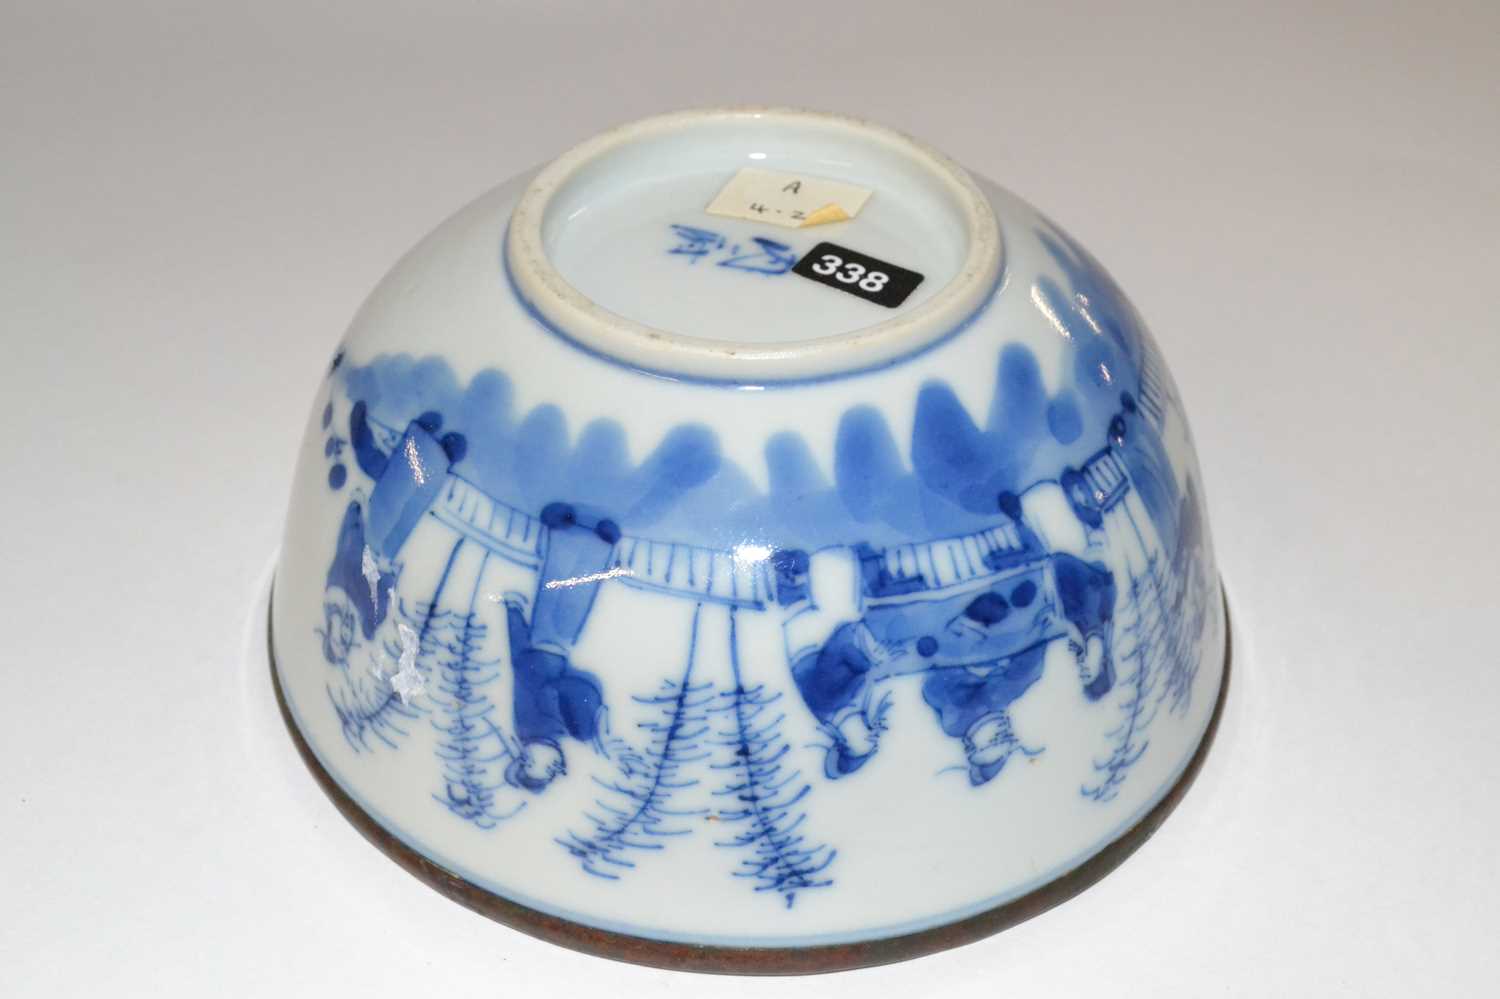 A further 19th Century Chinese porcelain bowl with blue and white decoration of figures and metal - Image 2 of 2